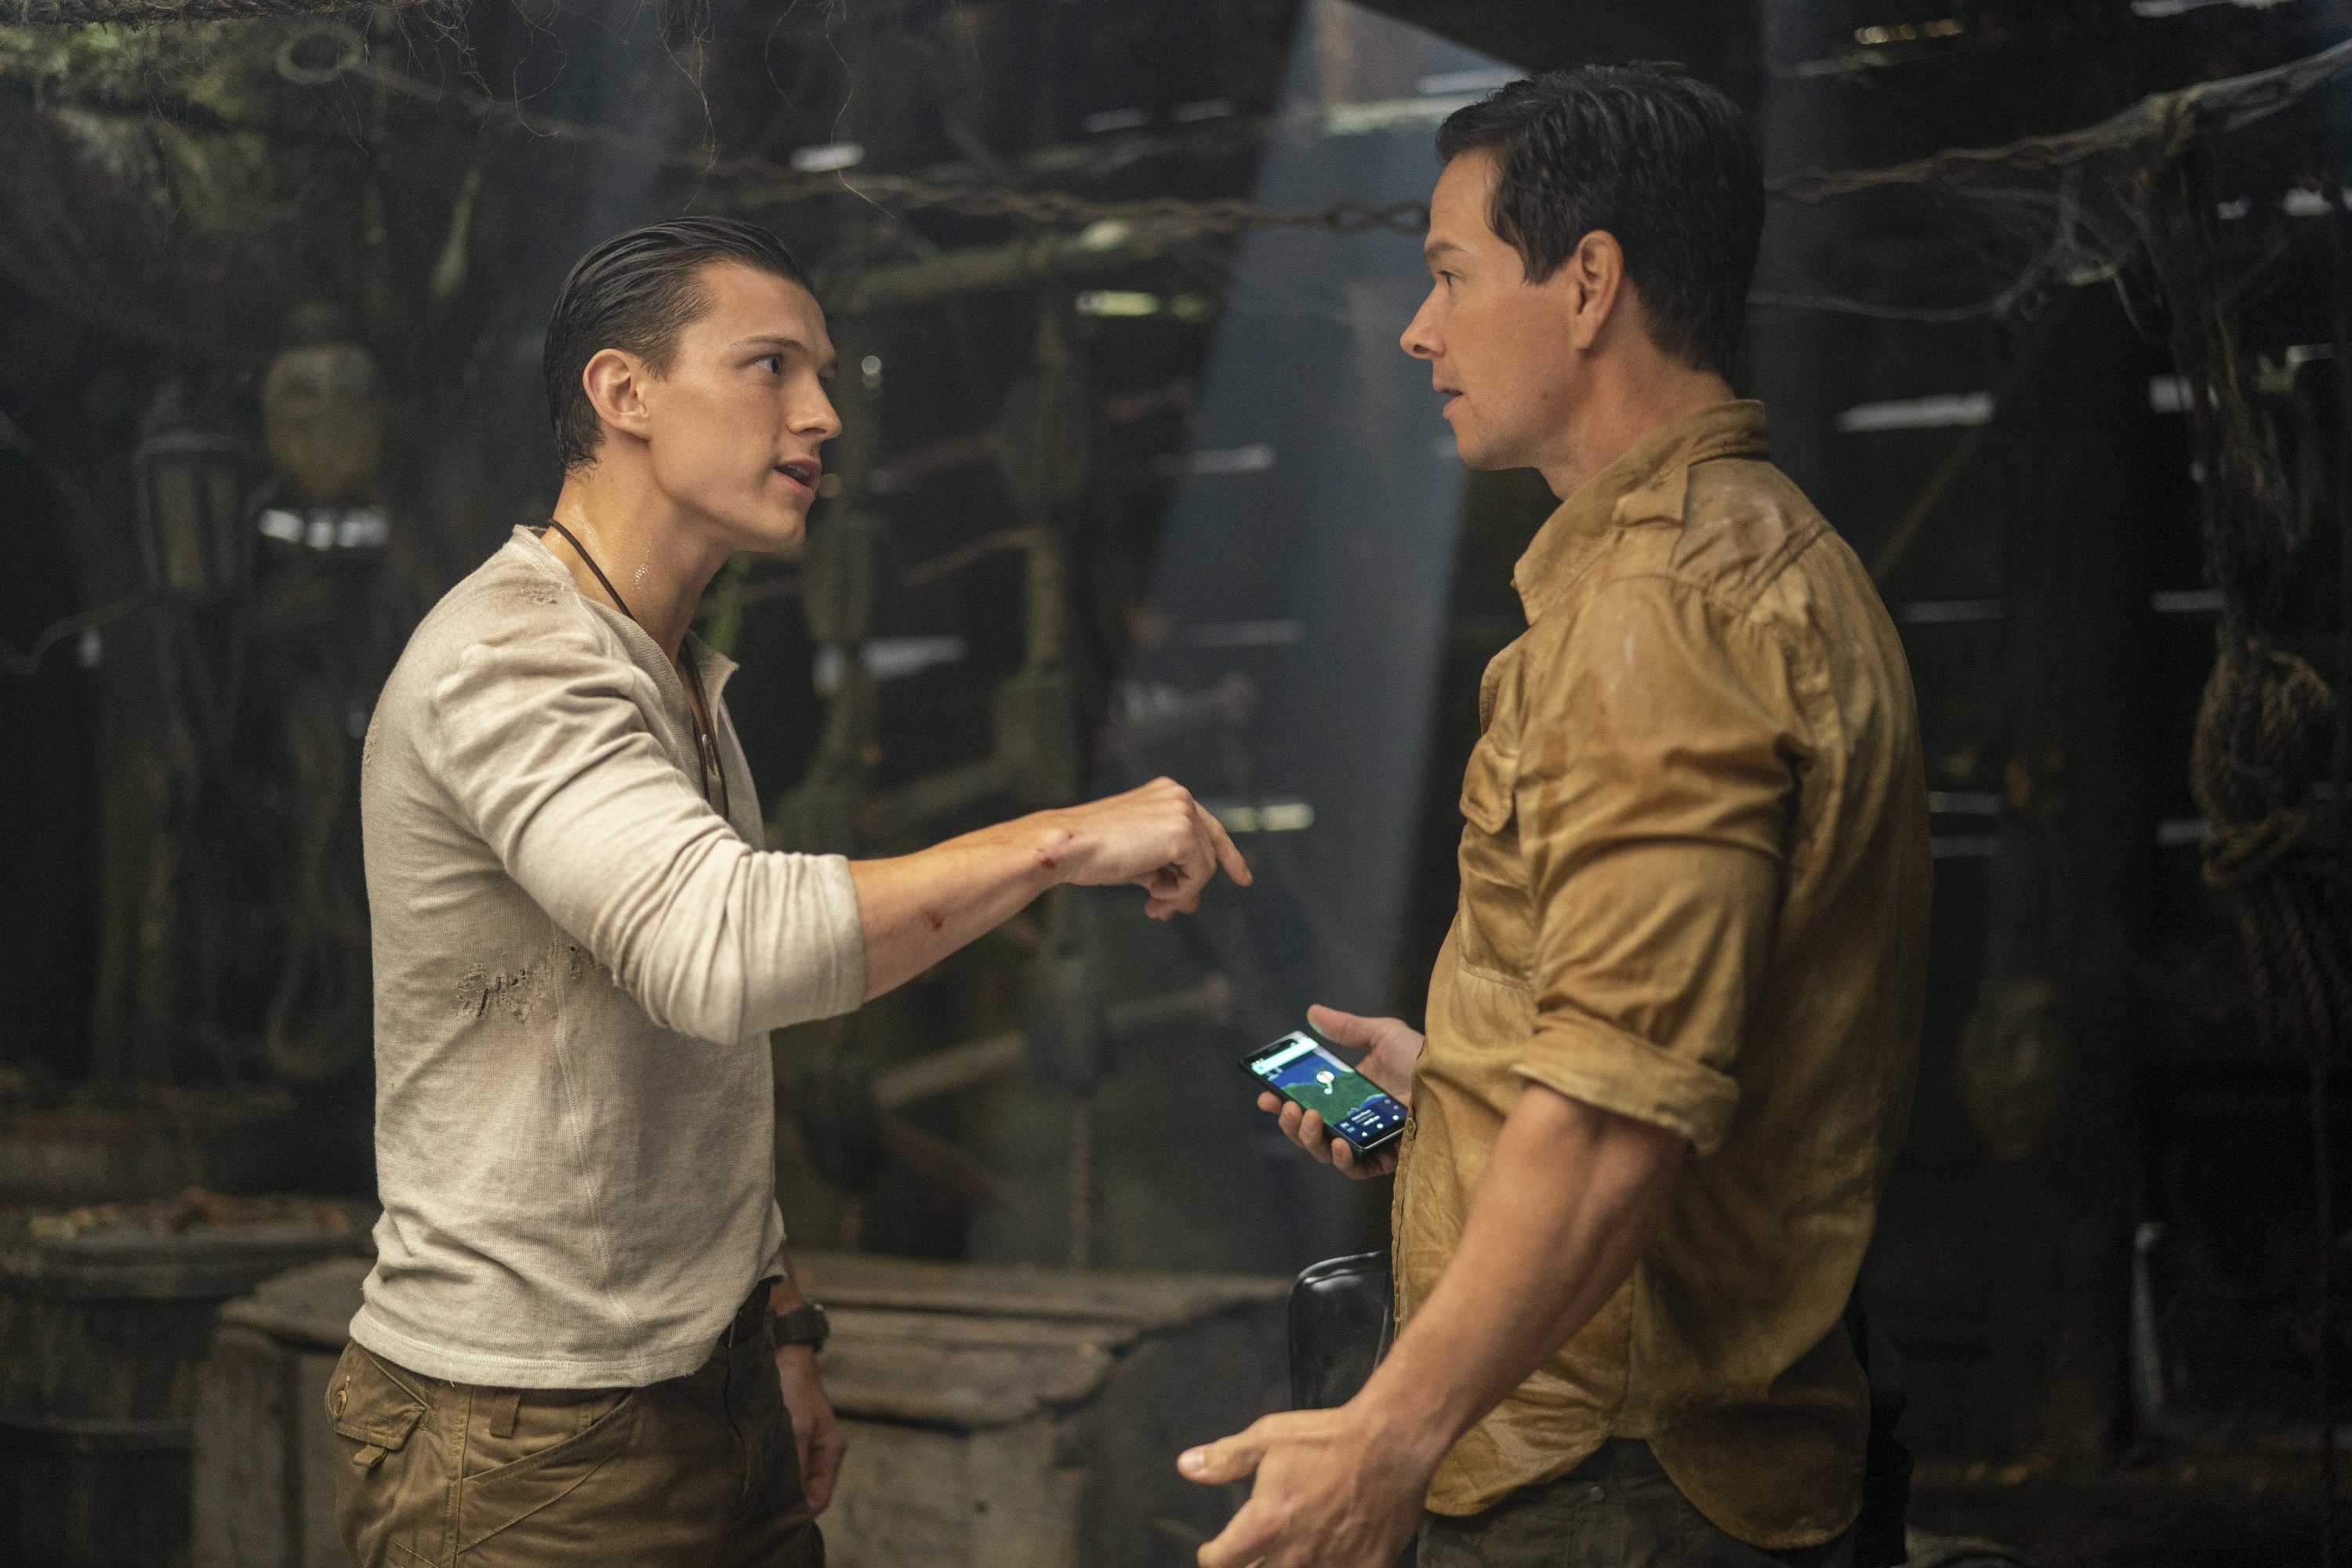 Mark Wahlberg (R) and Tom Holland appear in a scene from "Uncharted." (AP Photo)